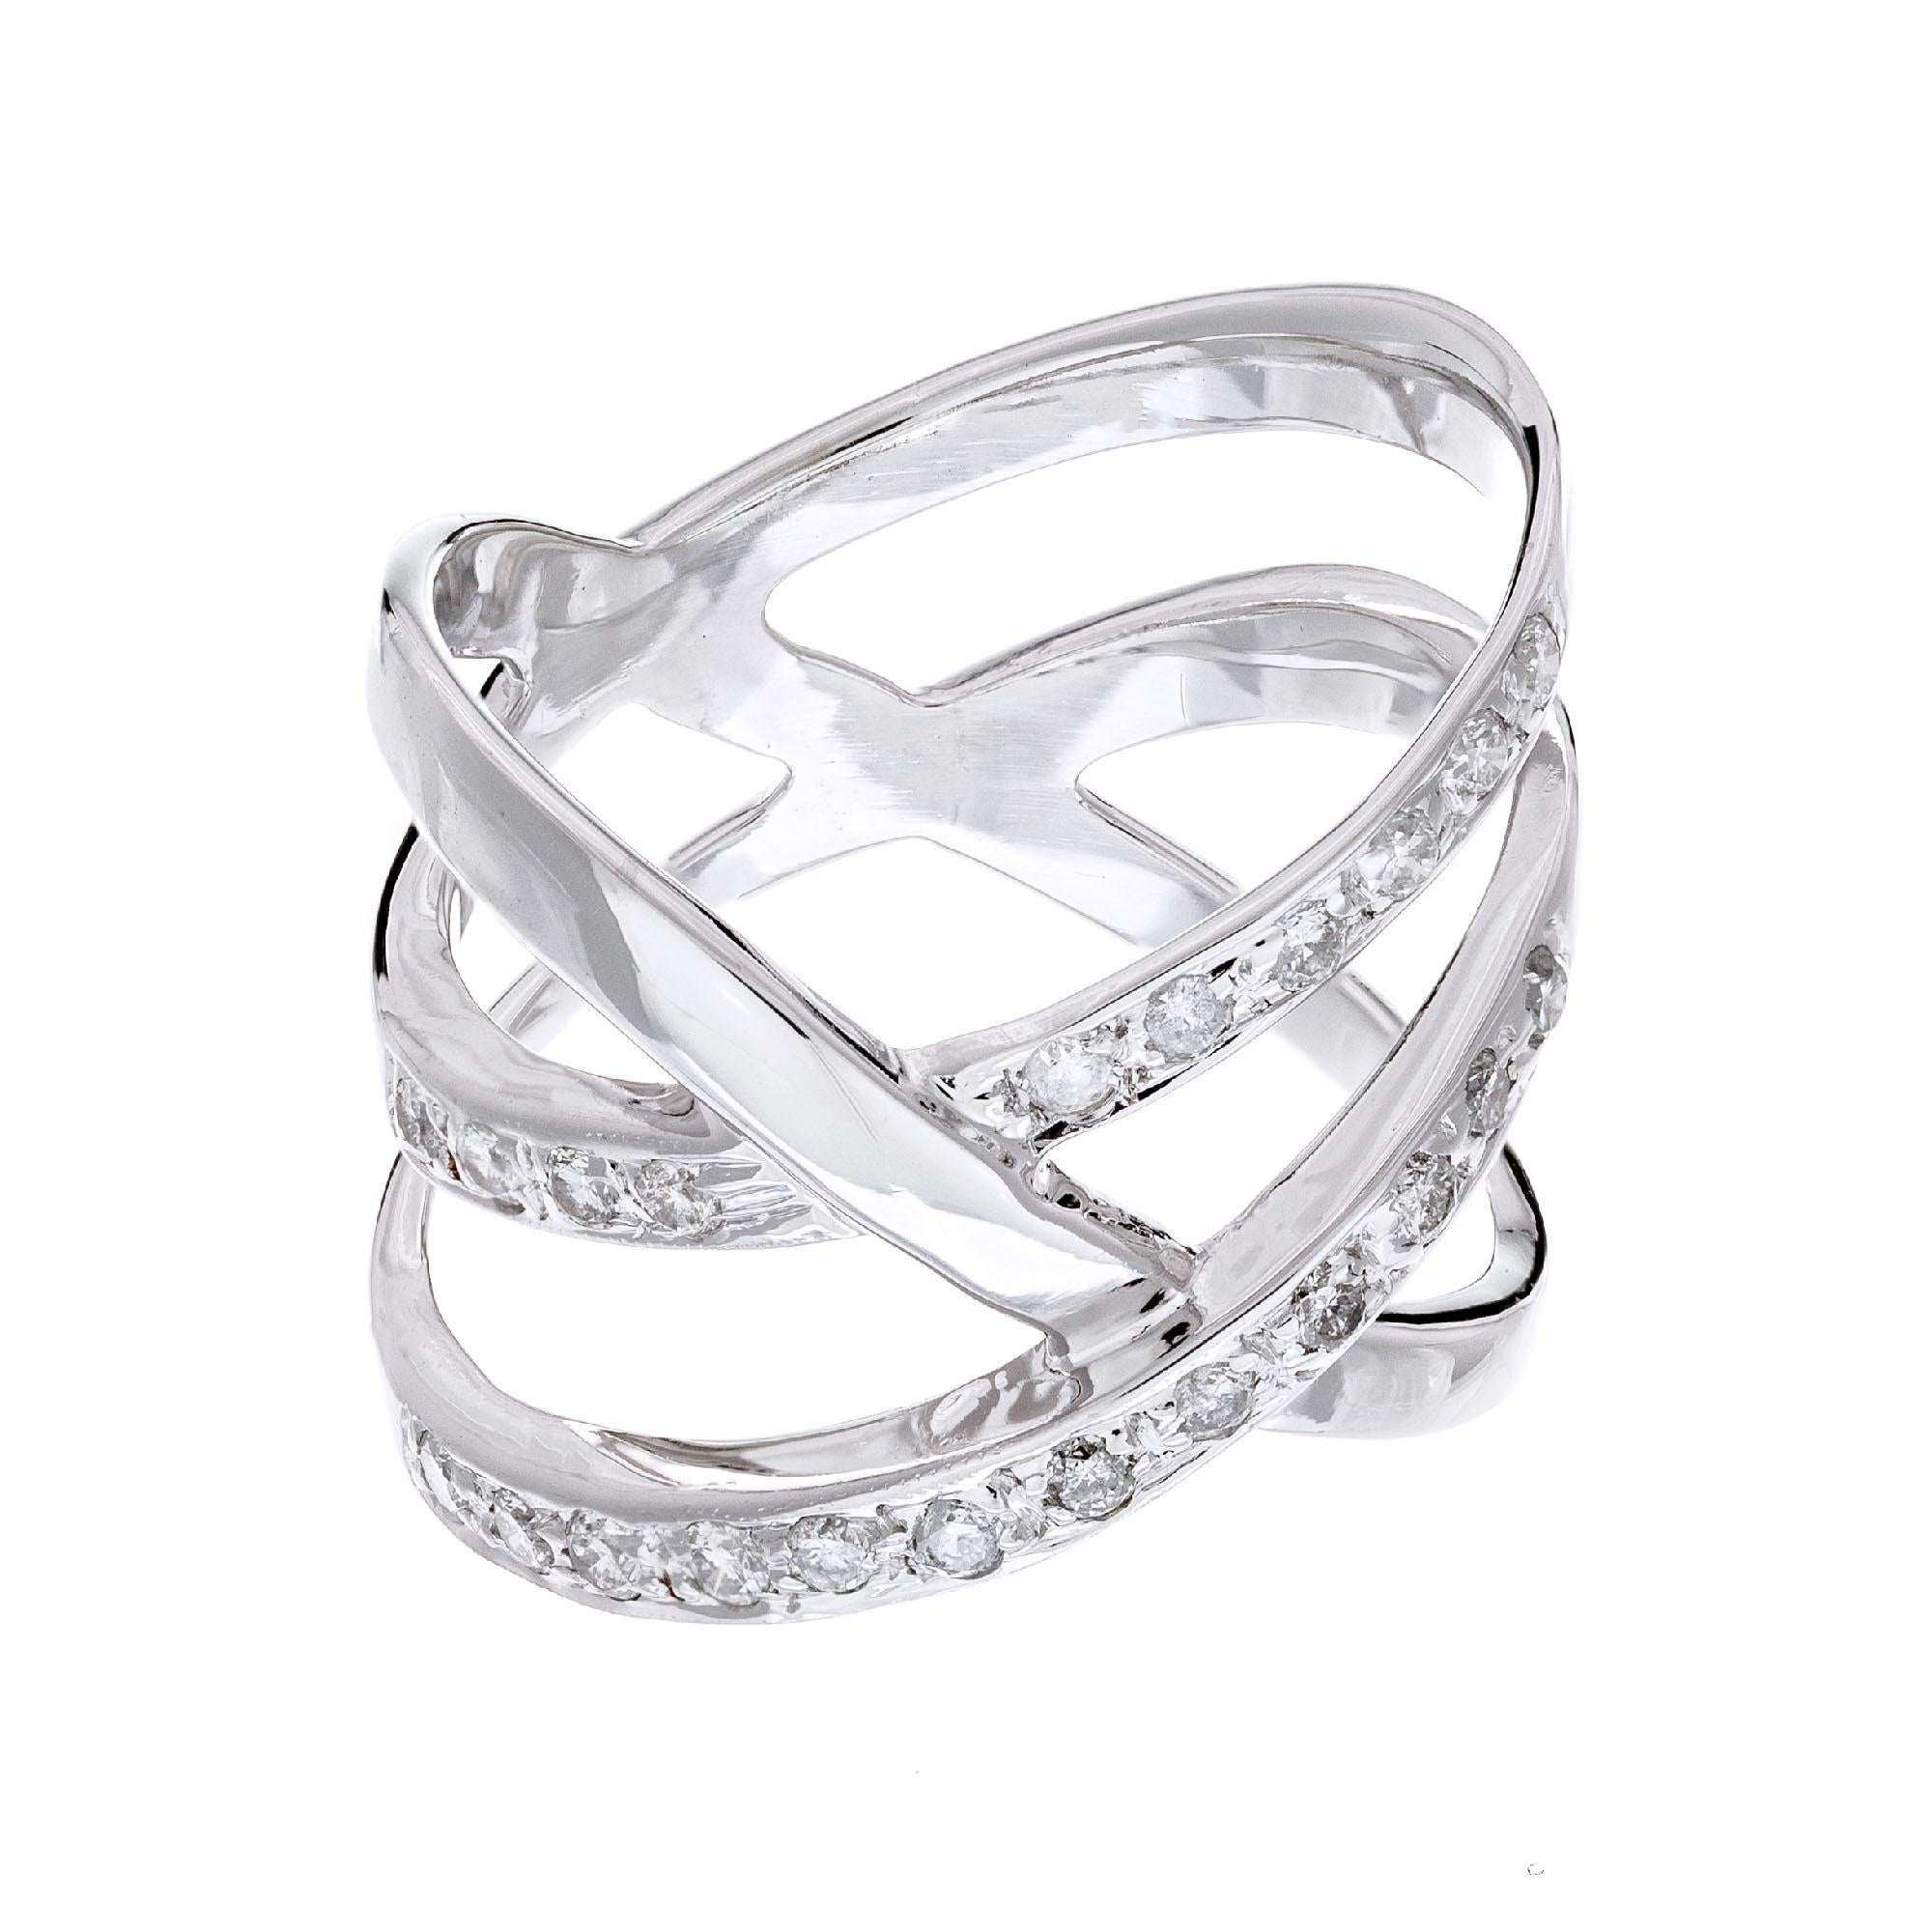 Three row criss cross diamond band ring, in 18k white gold with 21 round brilliant cut diamonds. 

21 round brilliant cut diamonds, H-I I approx. .31cts
Size 7.75 and not sizable
14k white gold
Stamped: 14k
7.6 grams
Width at top: 1.9mm
Height at